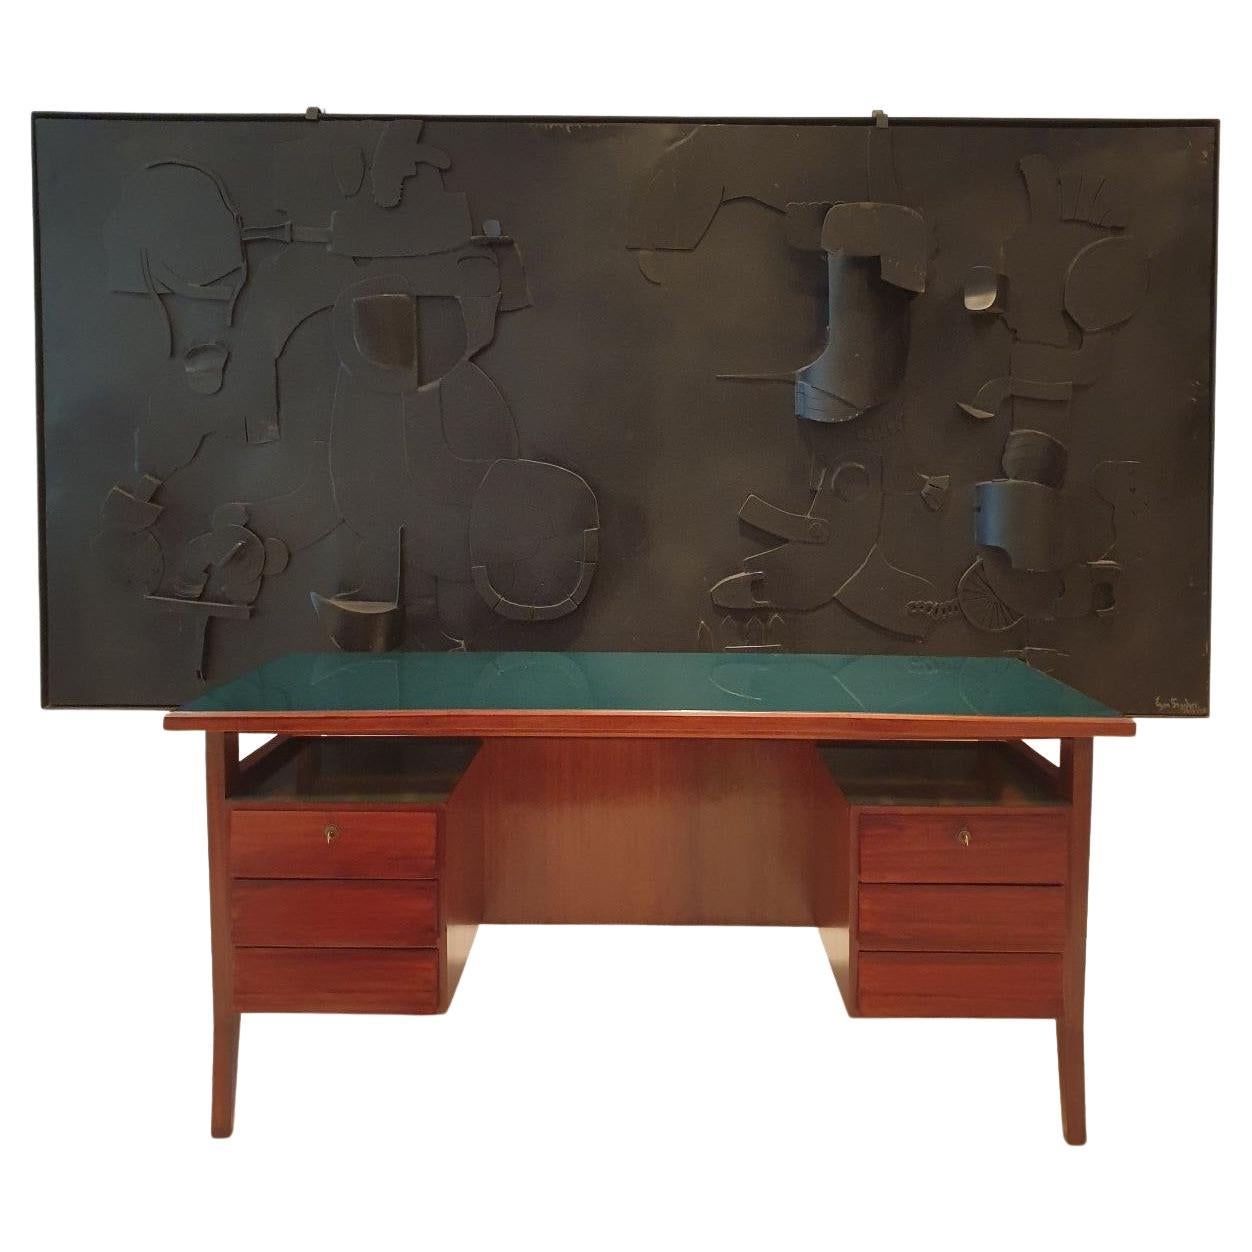 This walnut desk designed by Gio Ponti is of a very useful size and elegant design with the typical Gio Ponti leg shape, seen in many of his pieces. The bottom of the leg is flicked out so the desk does not appear bulky. The top is dark green